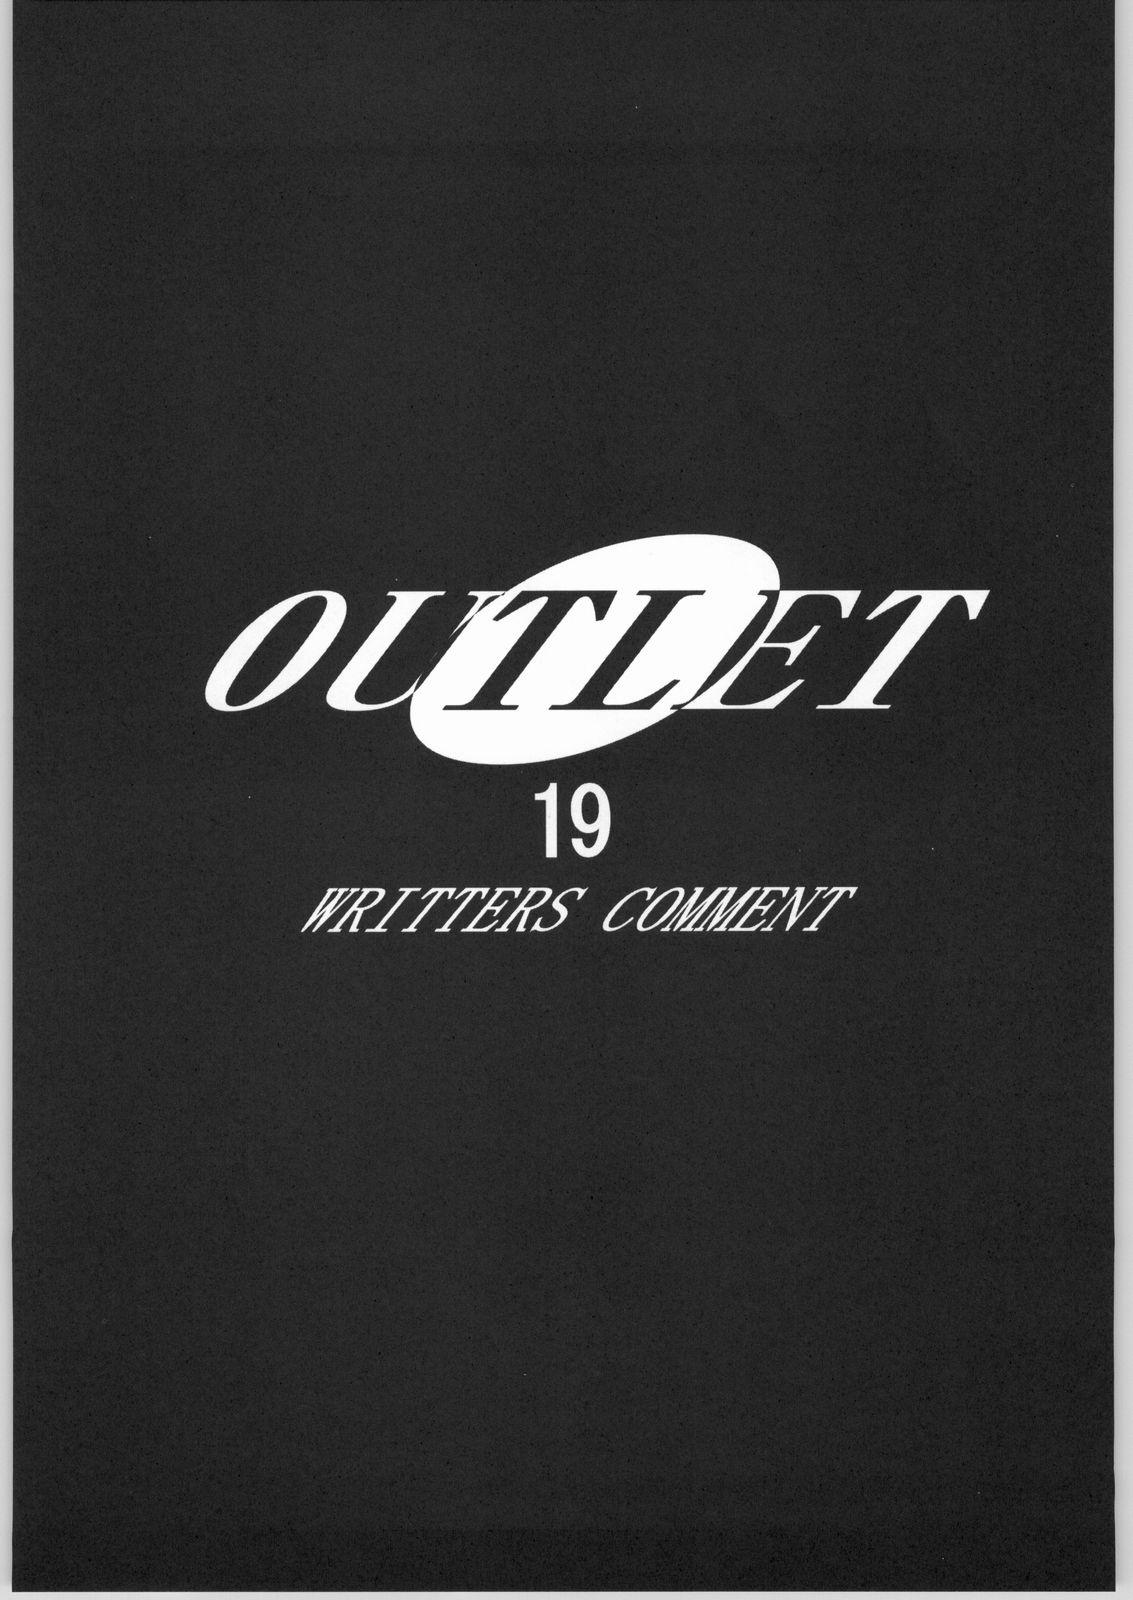 OUTLET 19 35